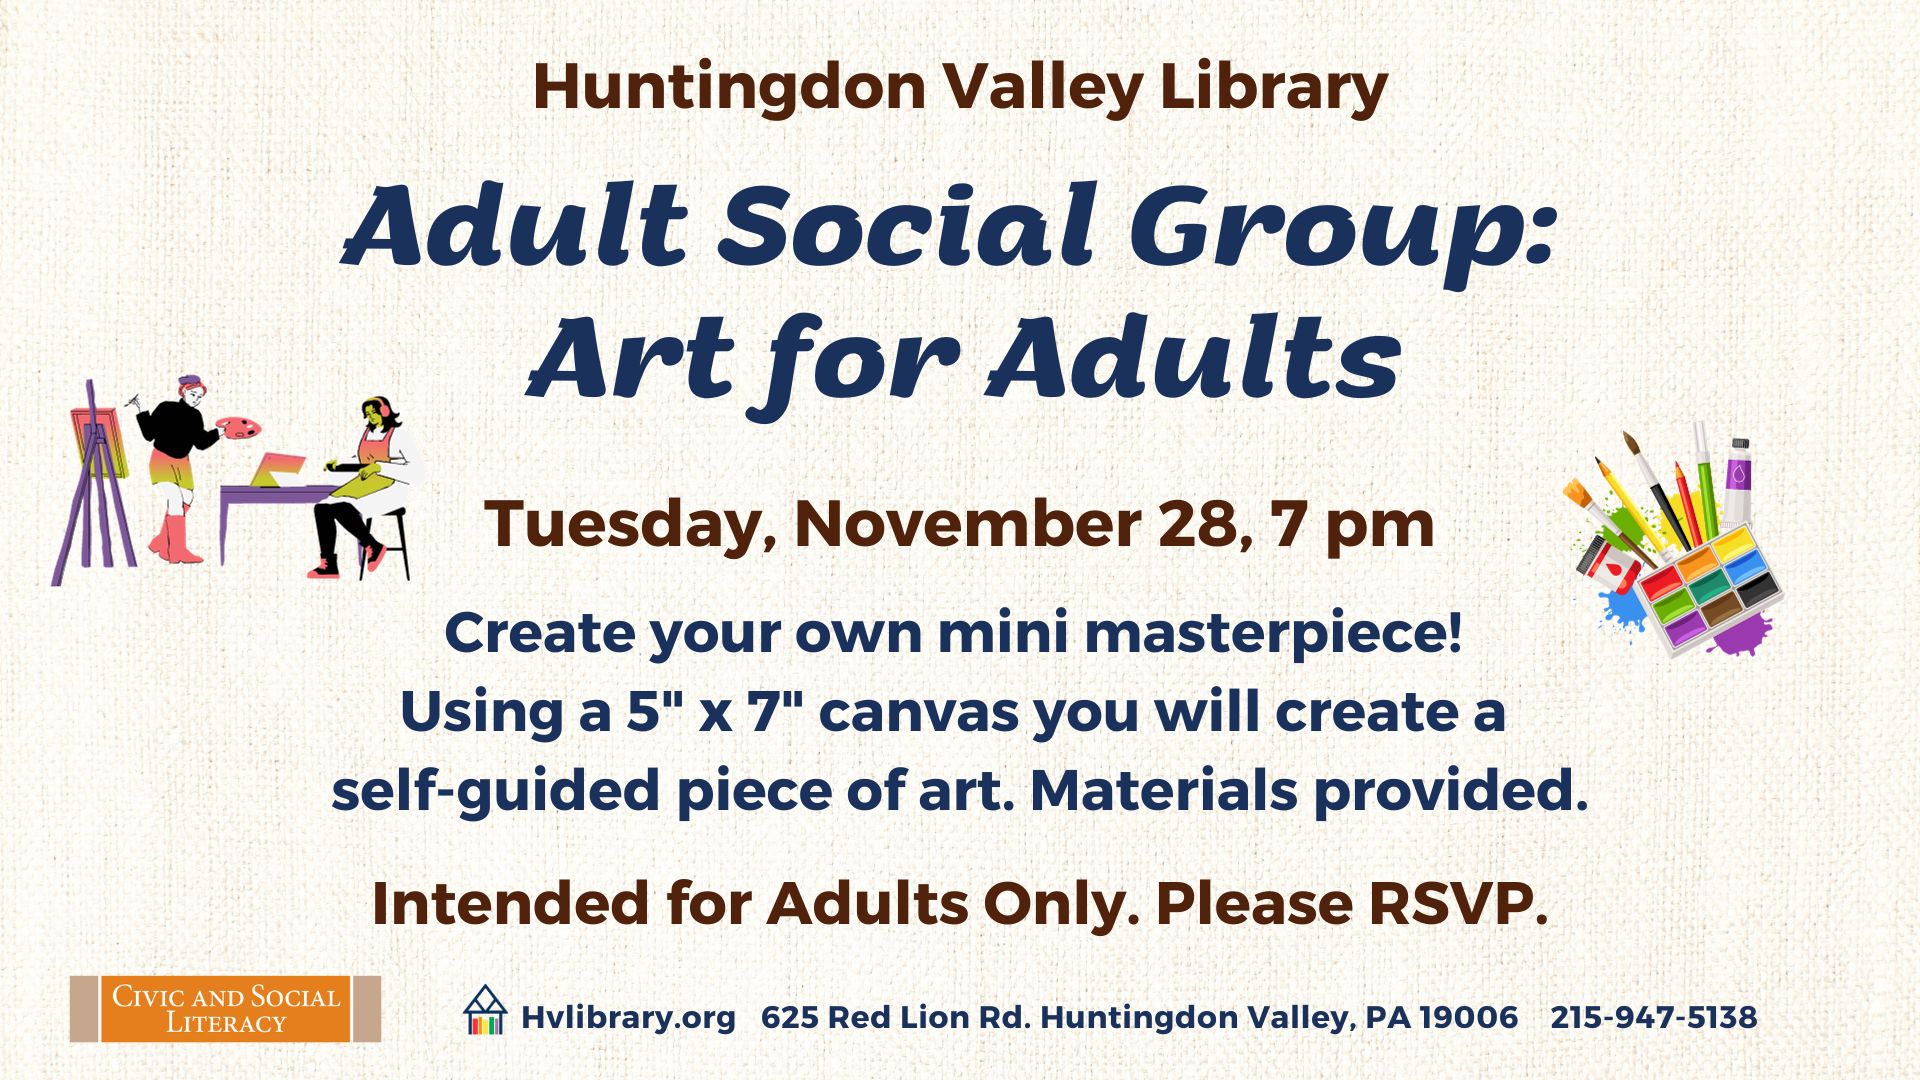 Adult Social Group: Art for Adults, Tues., Nov. 28, 7 pm – Huntingdon  Valley Library